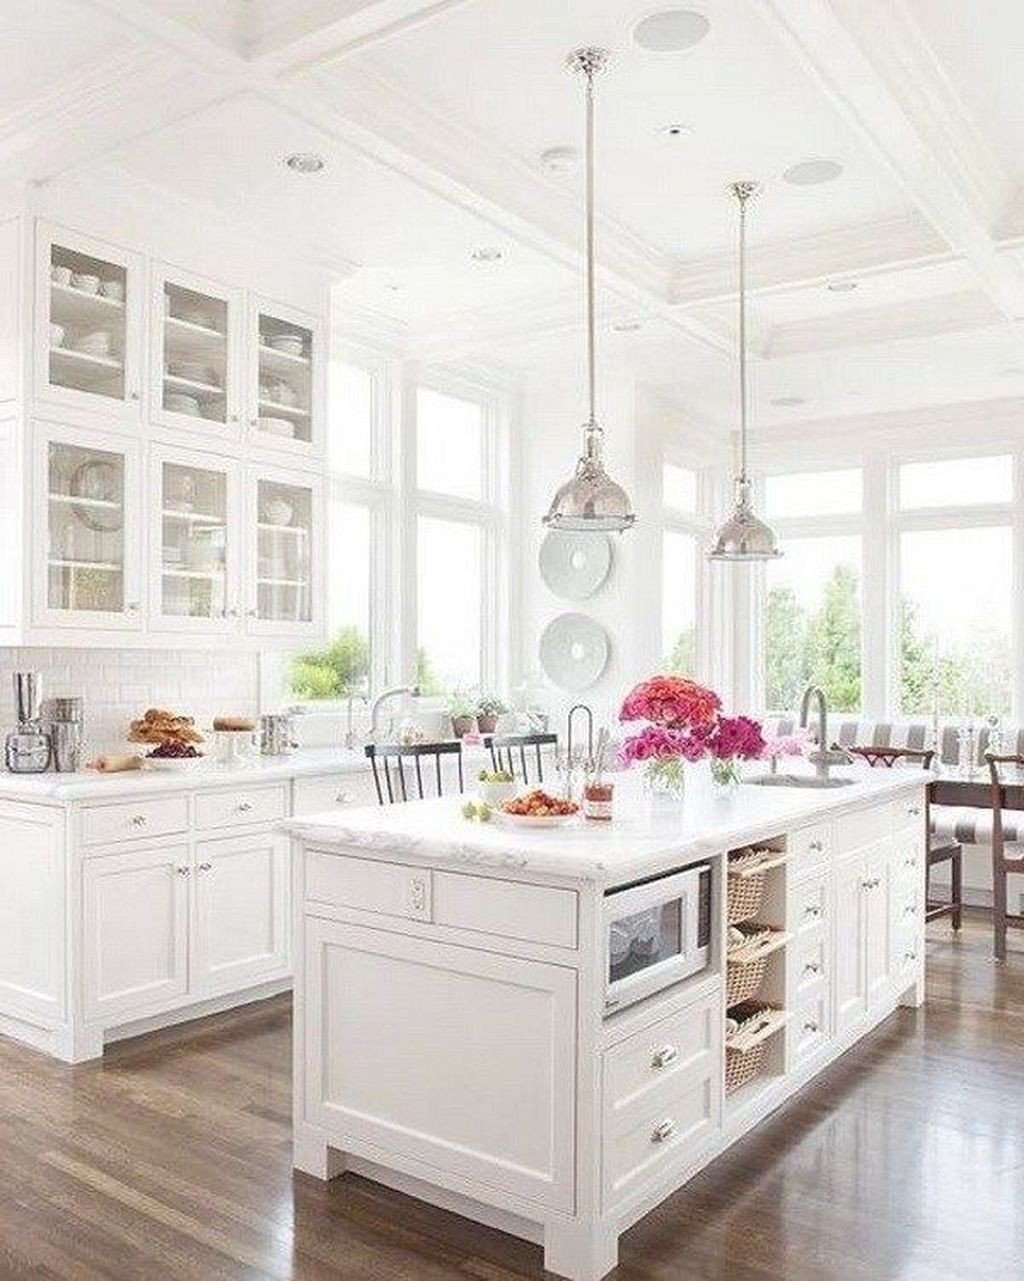 White kitchen marble countertops bhg sadly marble countertops would never